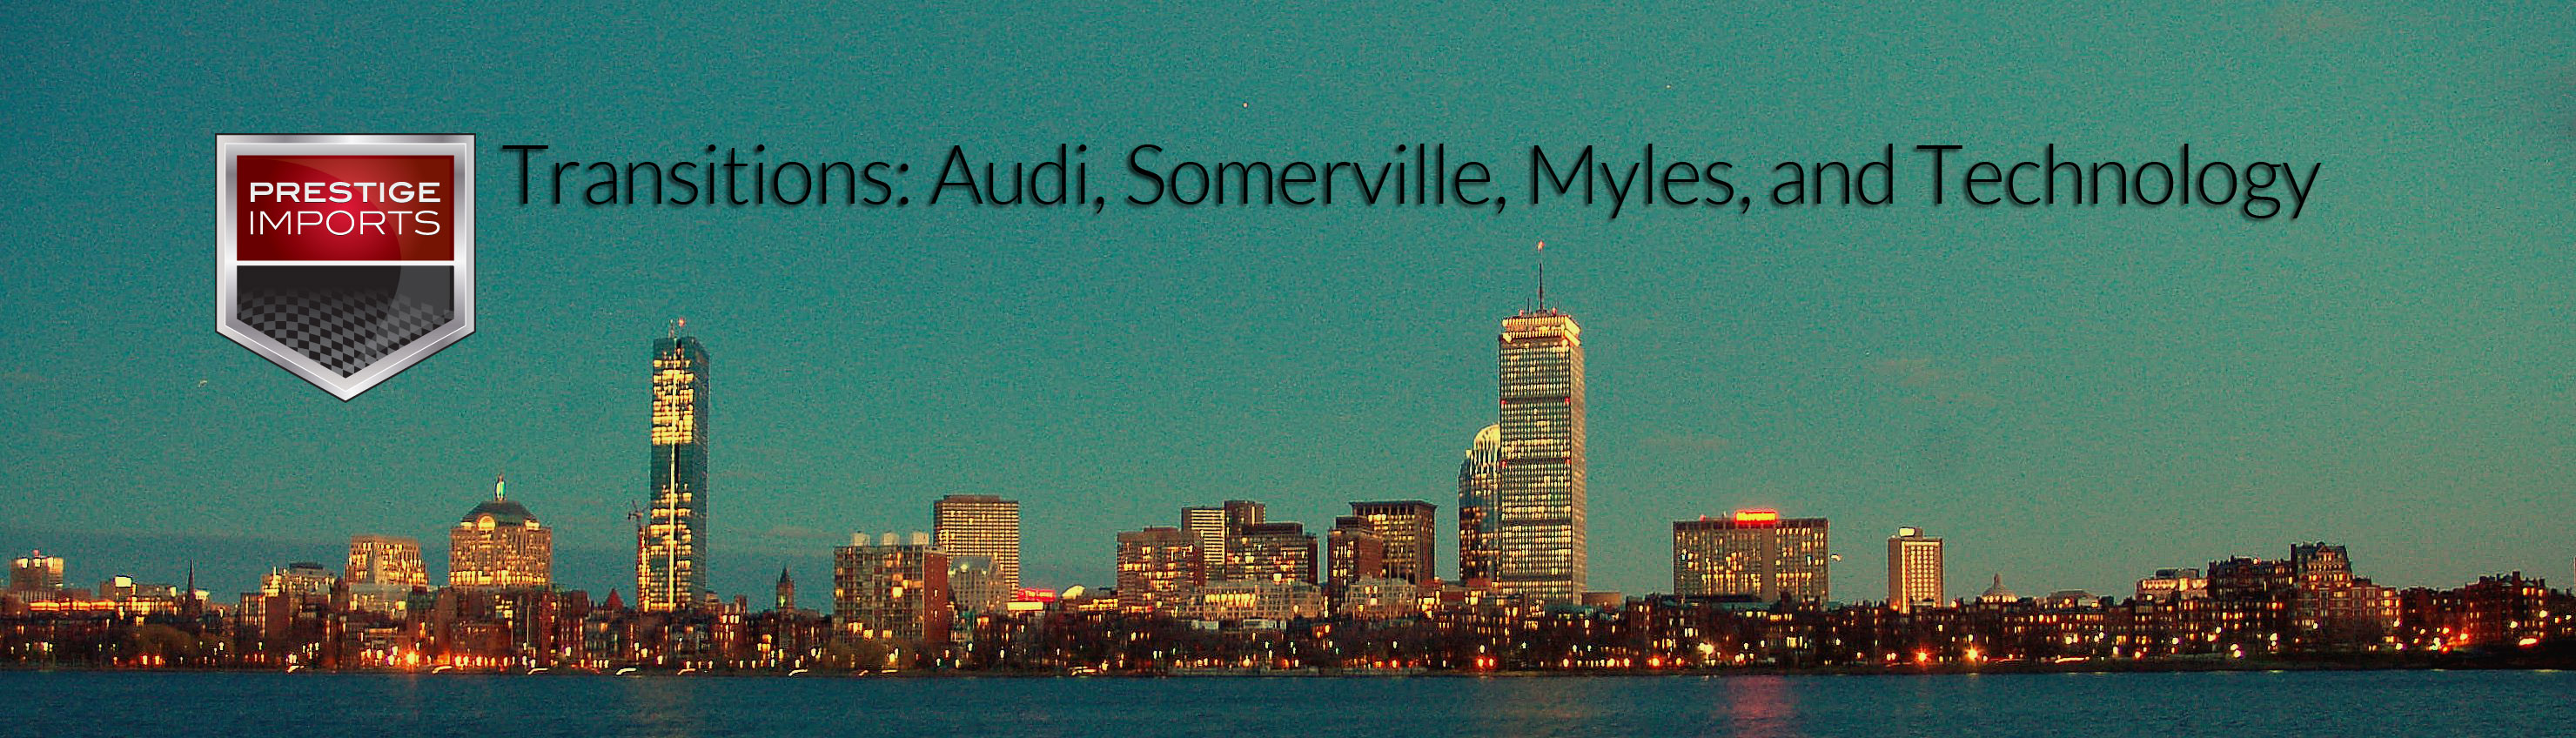 Transitions: Audi, Somerville, Myles, and Technology